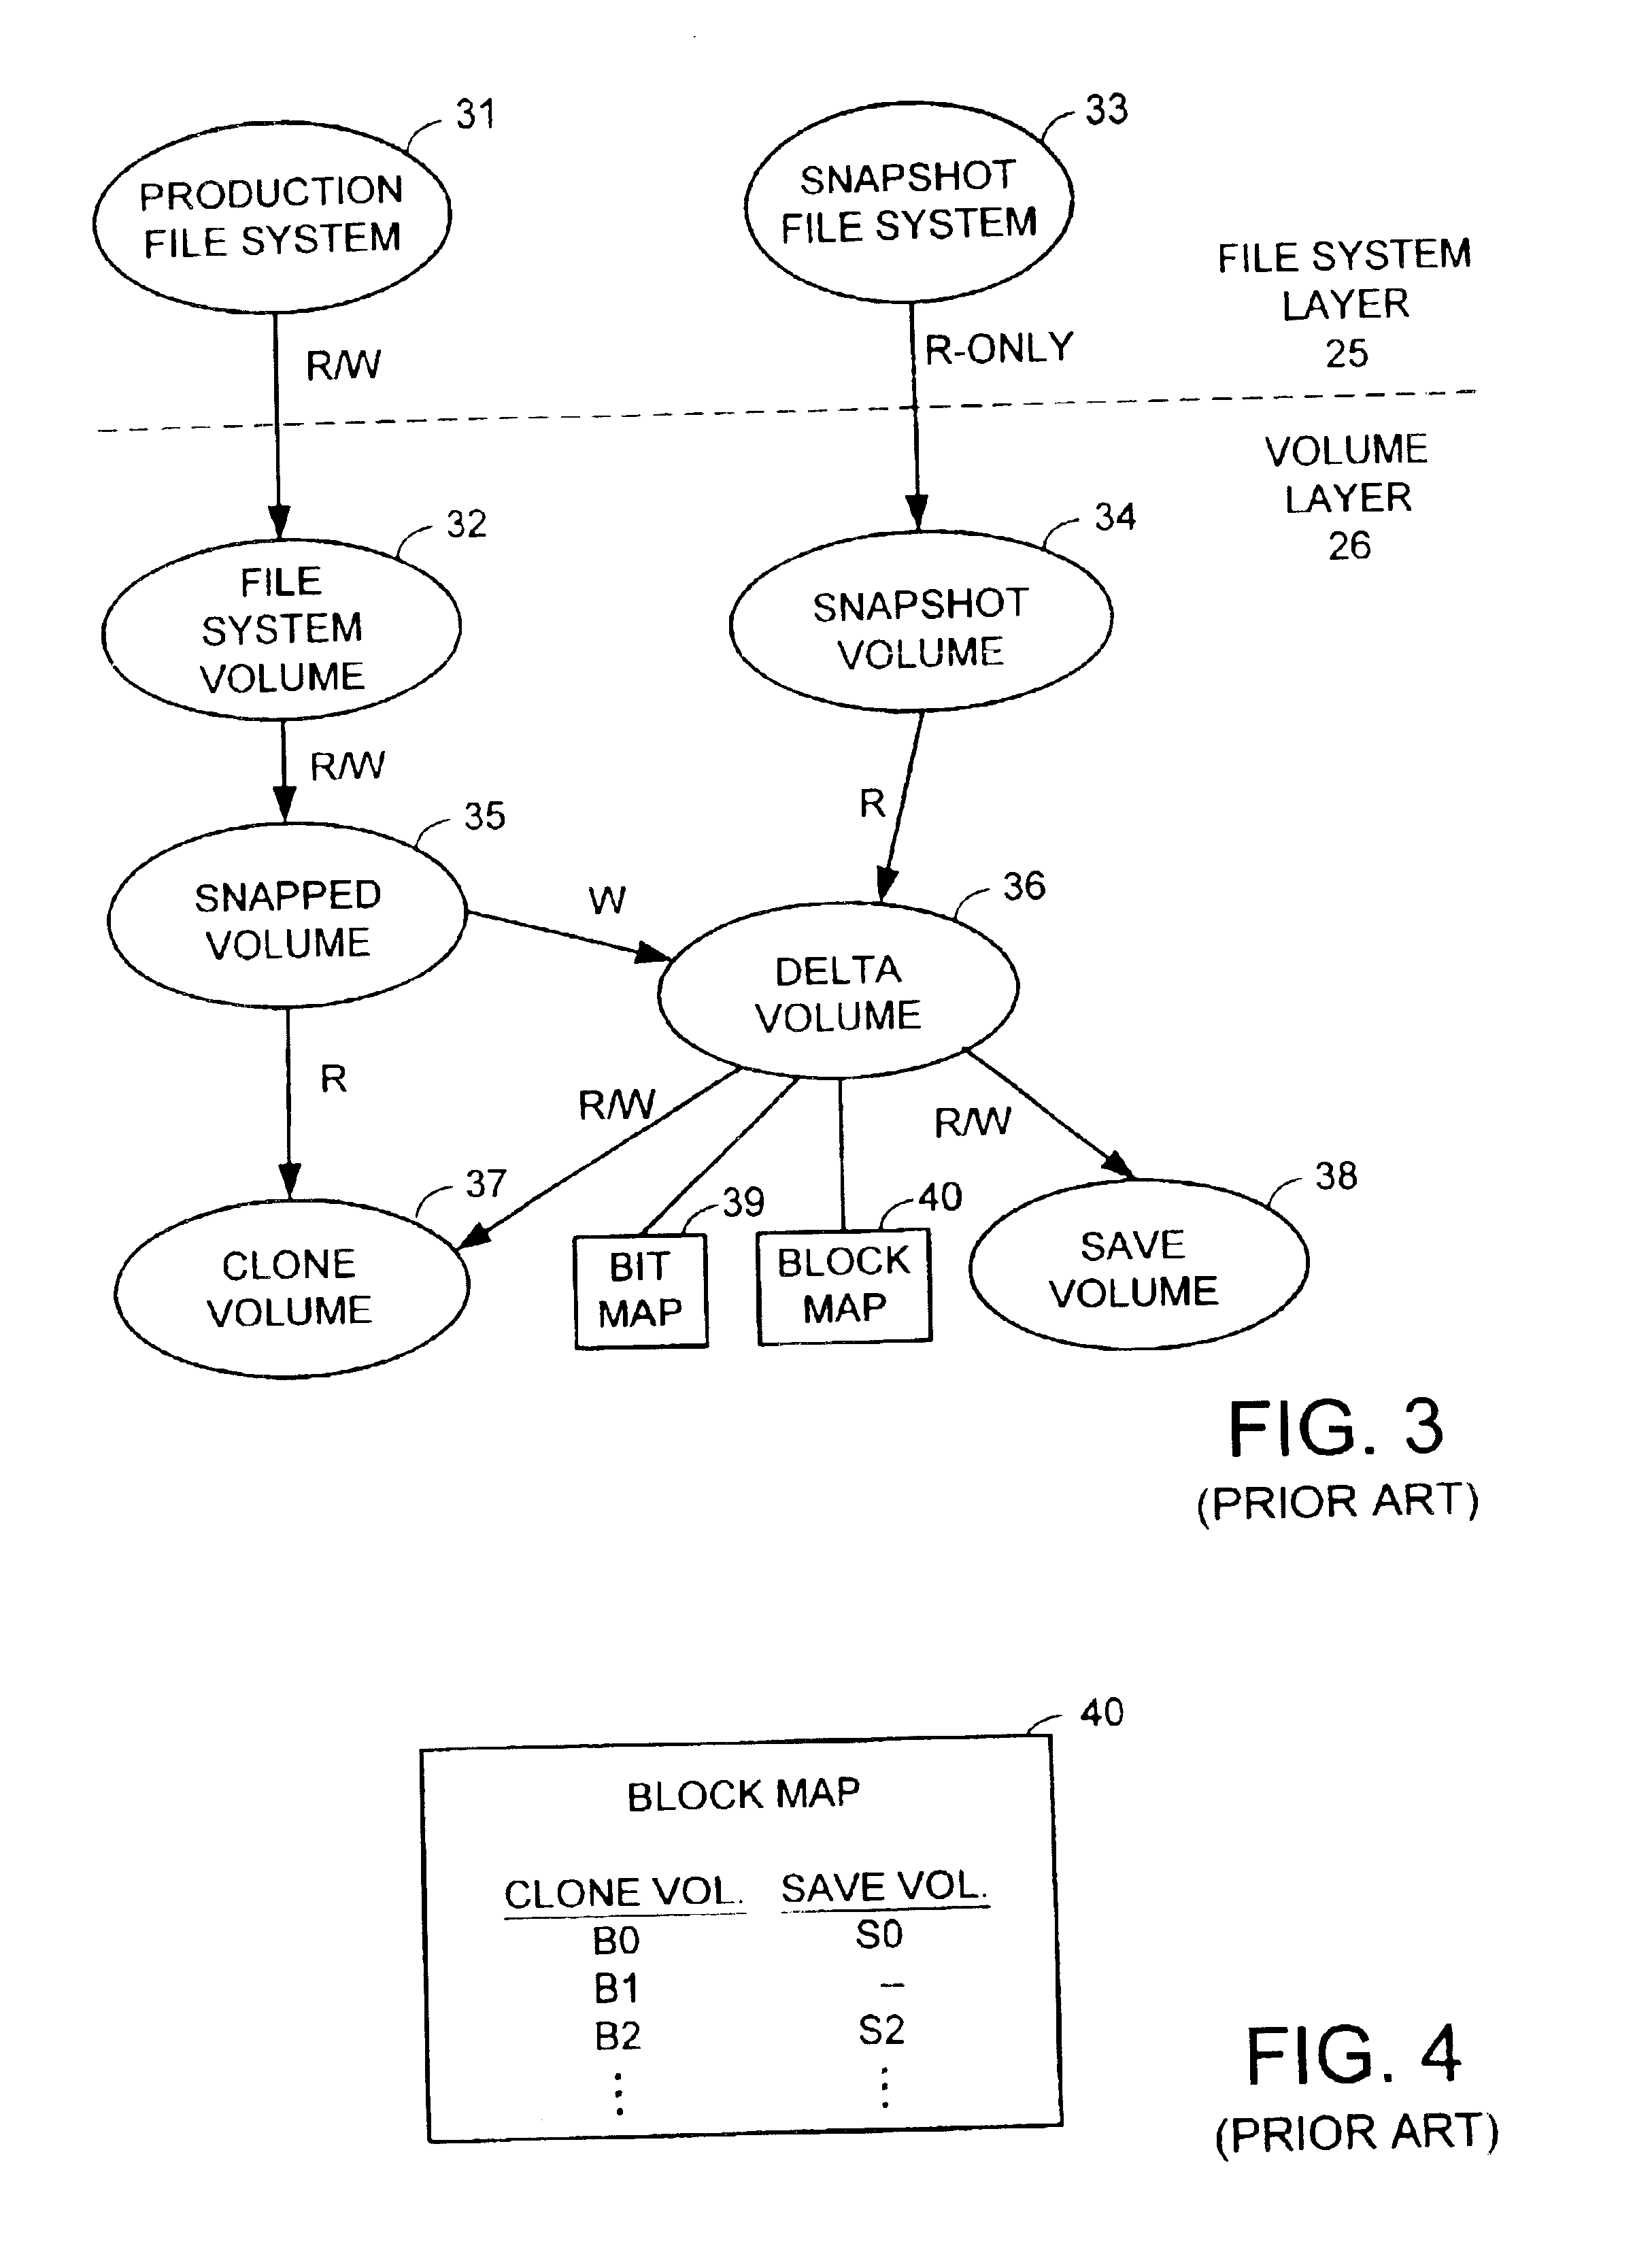 Instantaneous restoration of a production copy from a snapshot copy in a data storage system